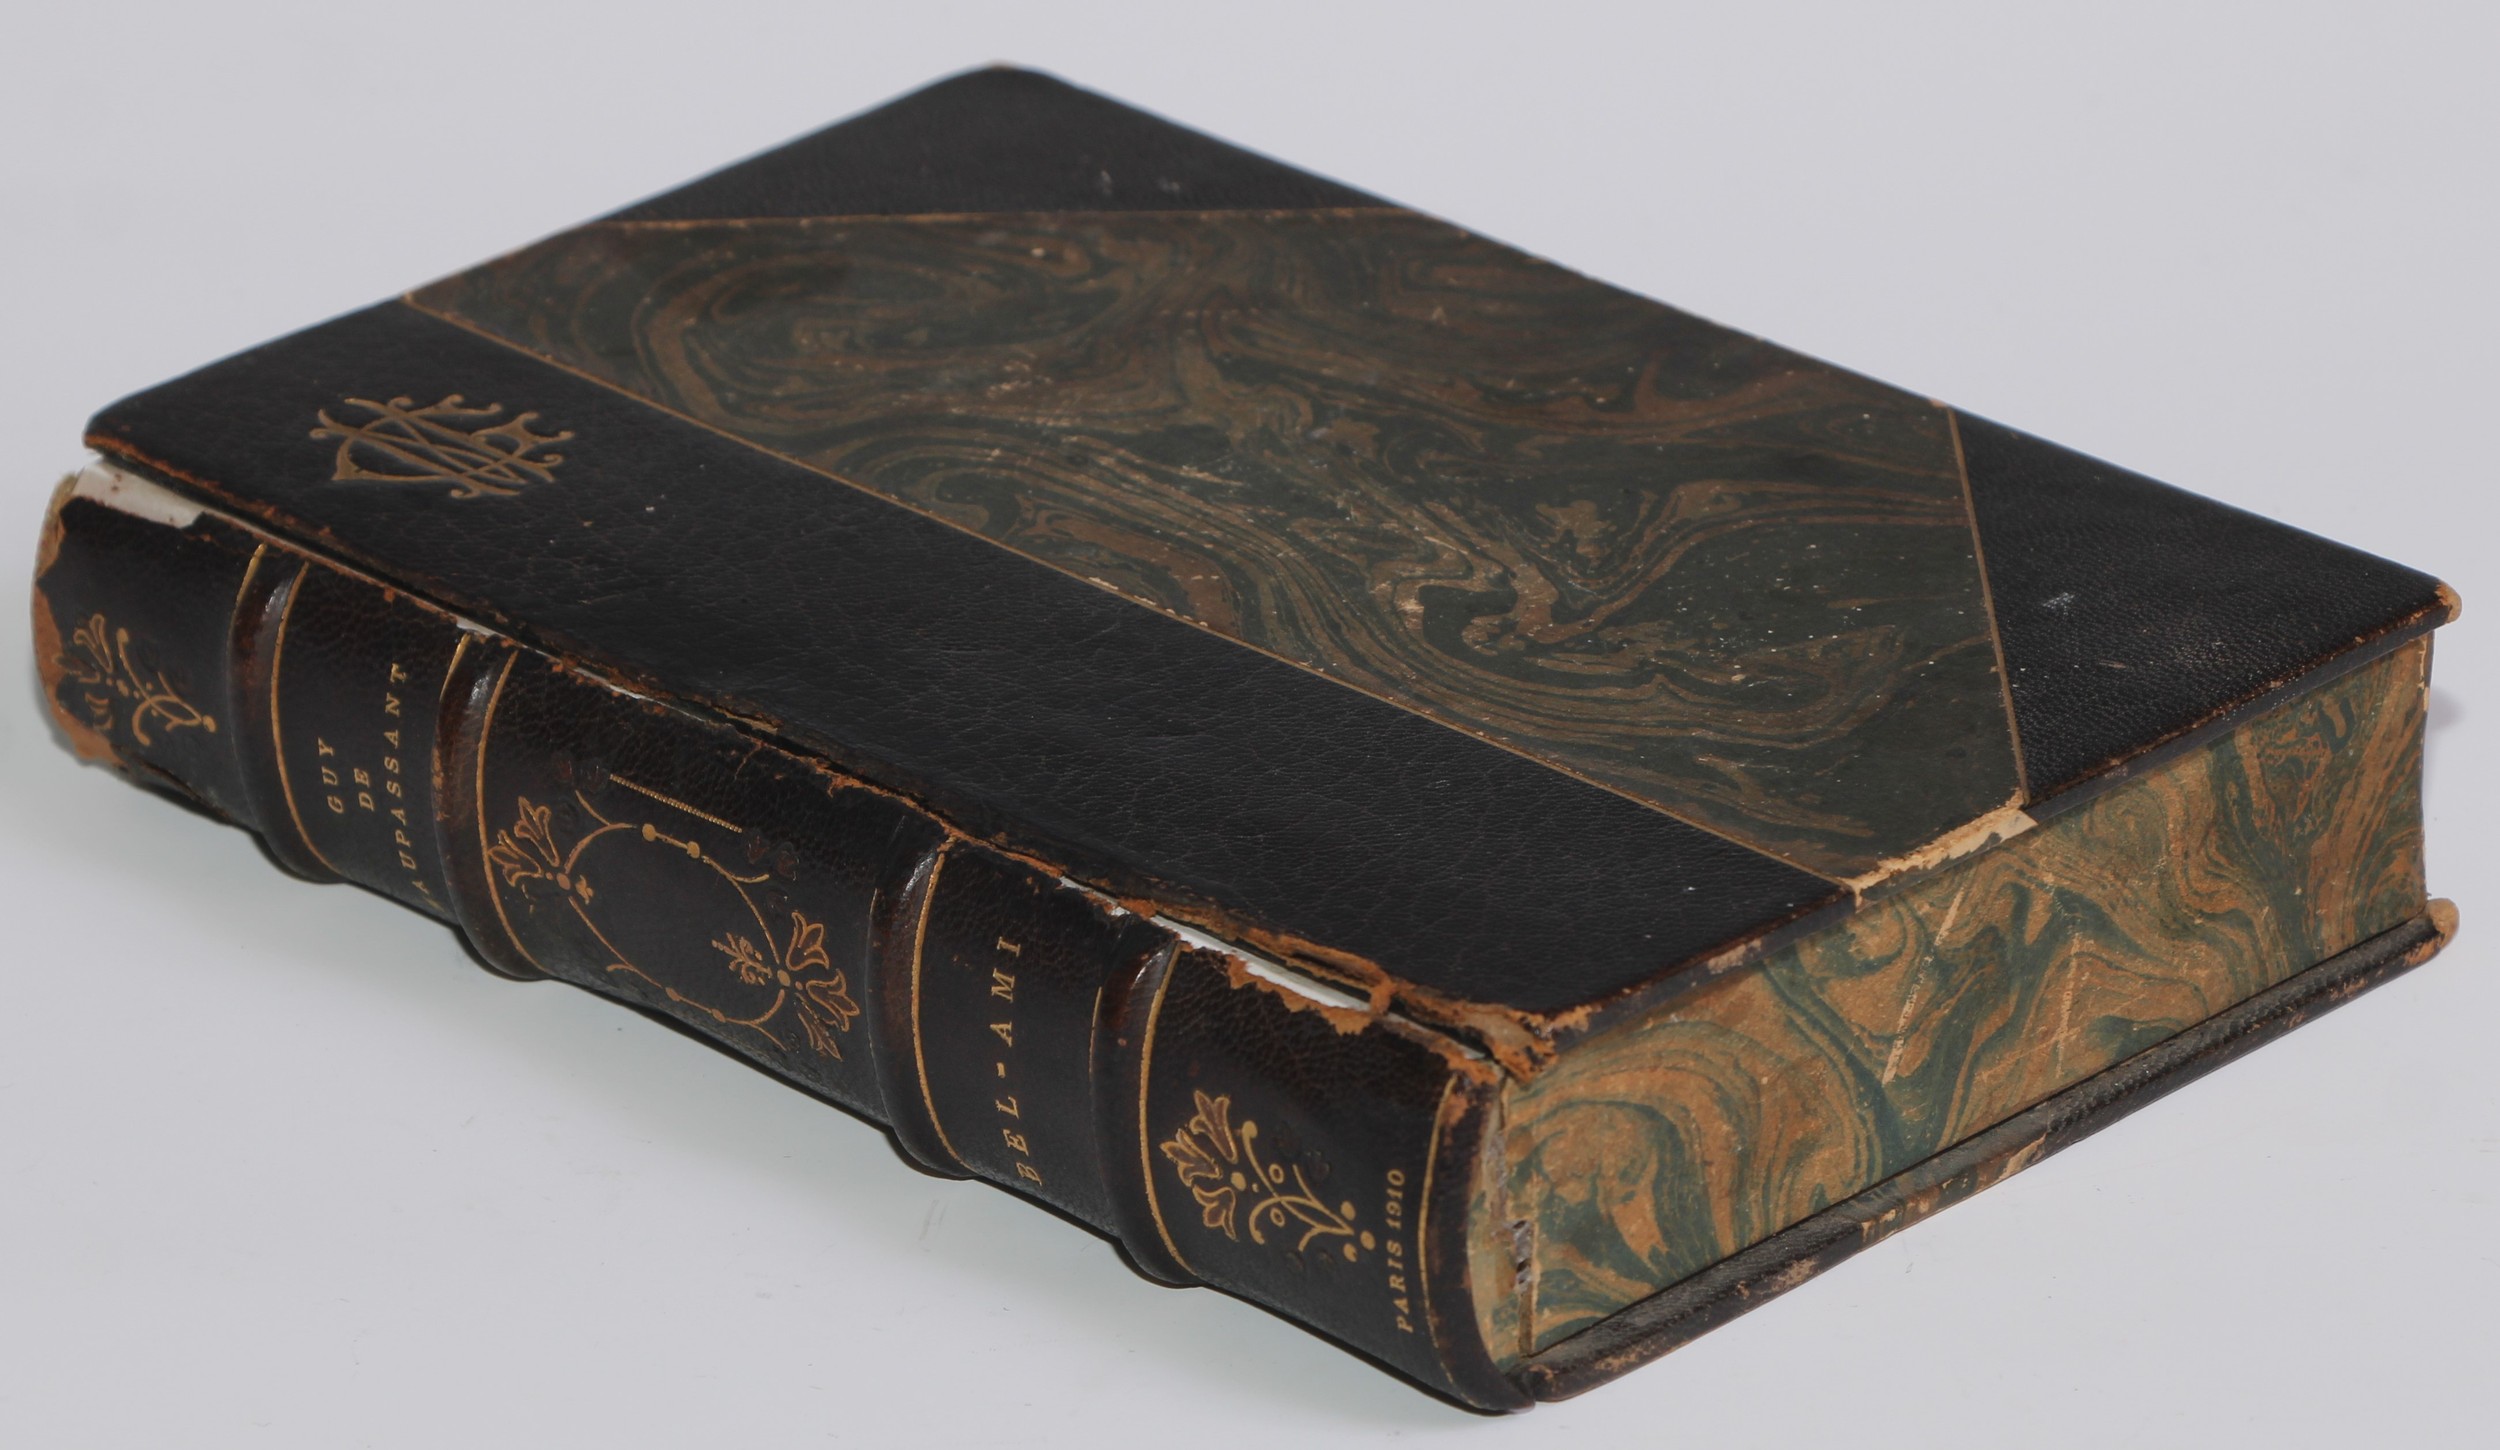 An early 20th century disguise volume dummy book box, as an edition of Guy de Maupassant Bel-Ami,